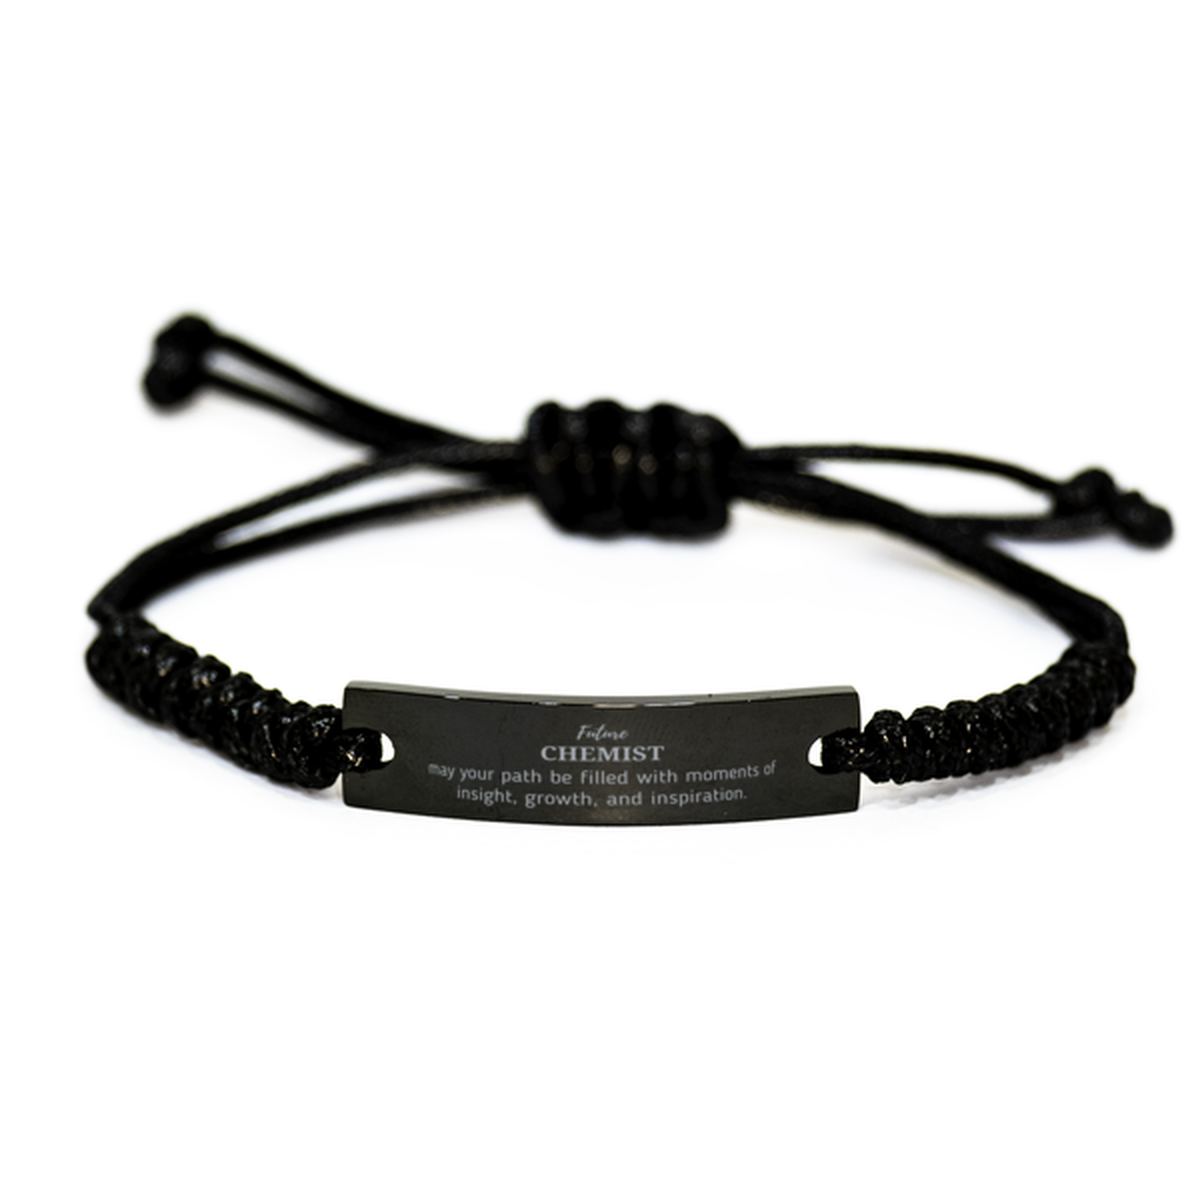 Future Chemist Gifts, May your path be filled with moments of insight, Graduation Gifts for New Chemist, Christmas Unique Black Rope Bracelet For Men, Women, Friends